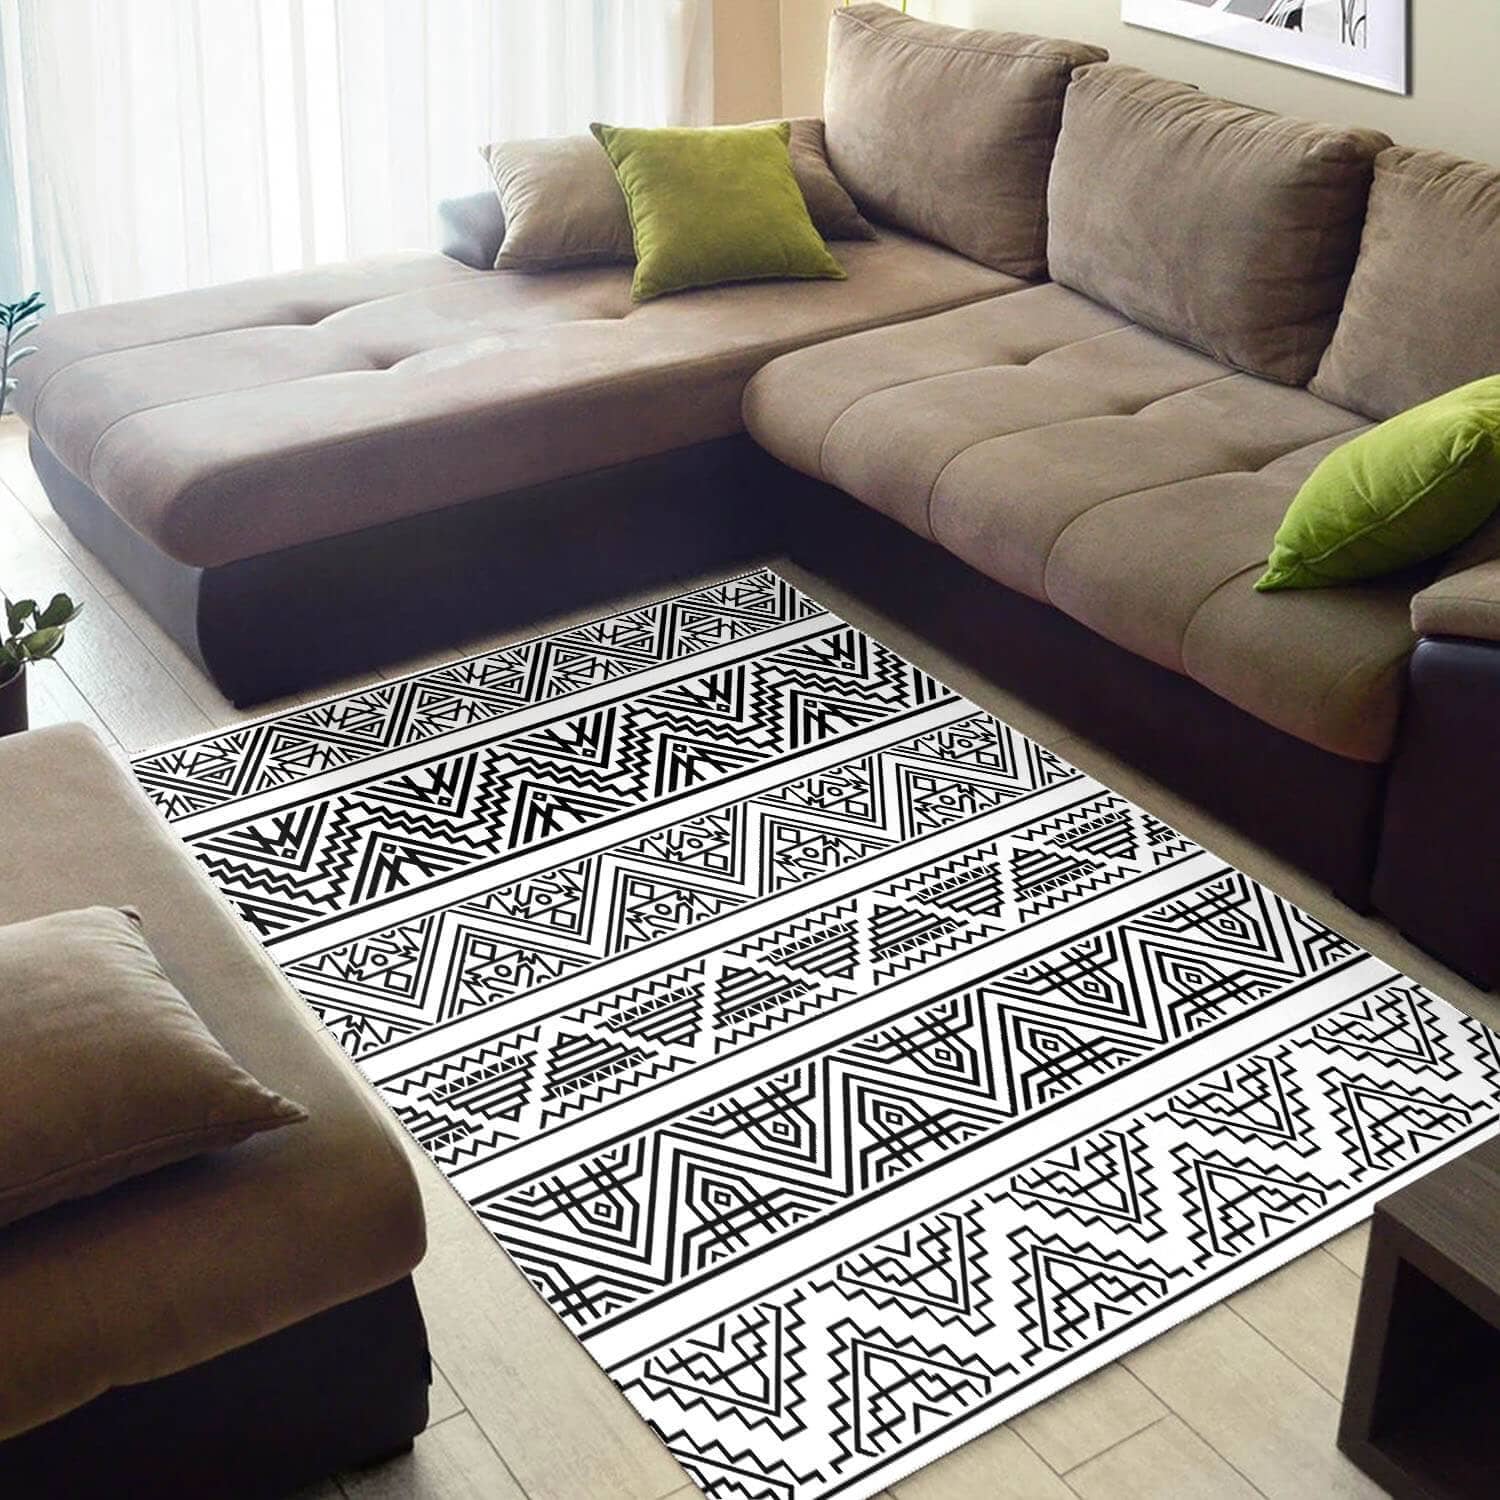 Trendy African Nice Black History Month Afrocentric Pattern Art Themed Carpet House Rug